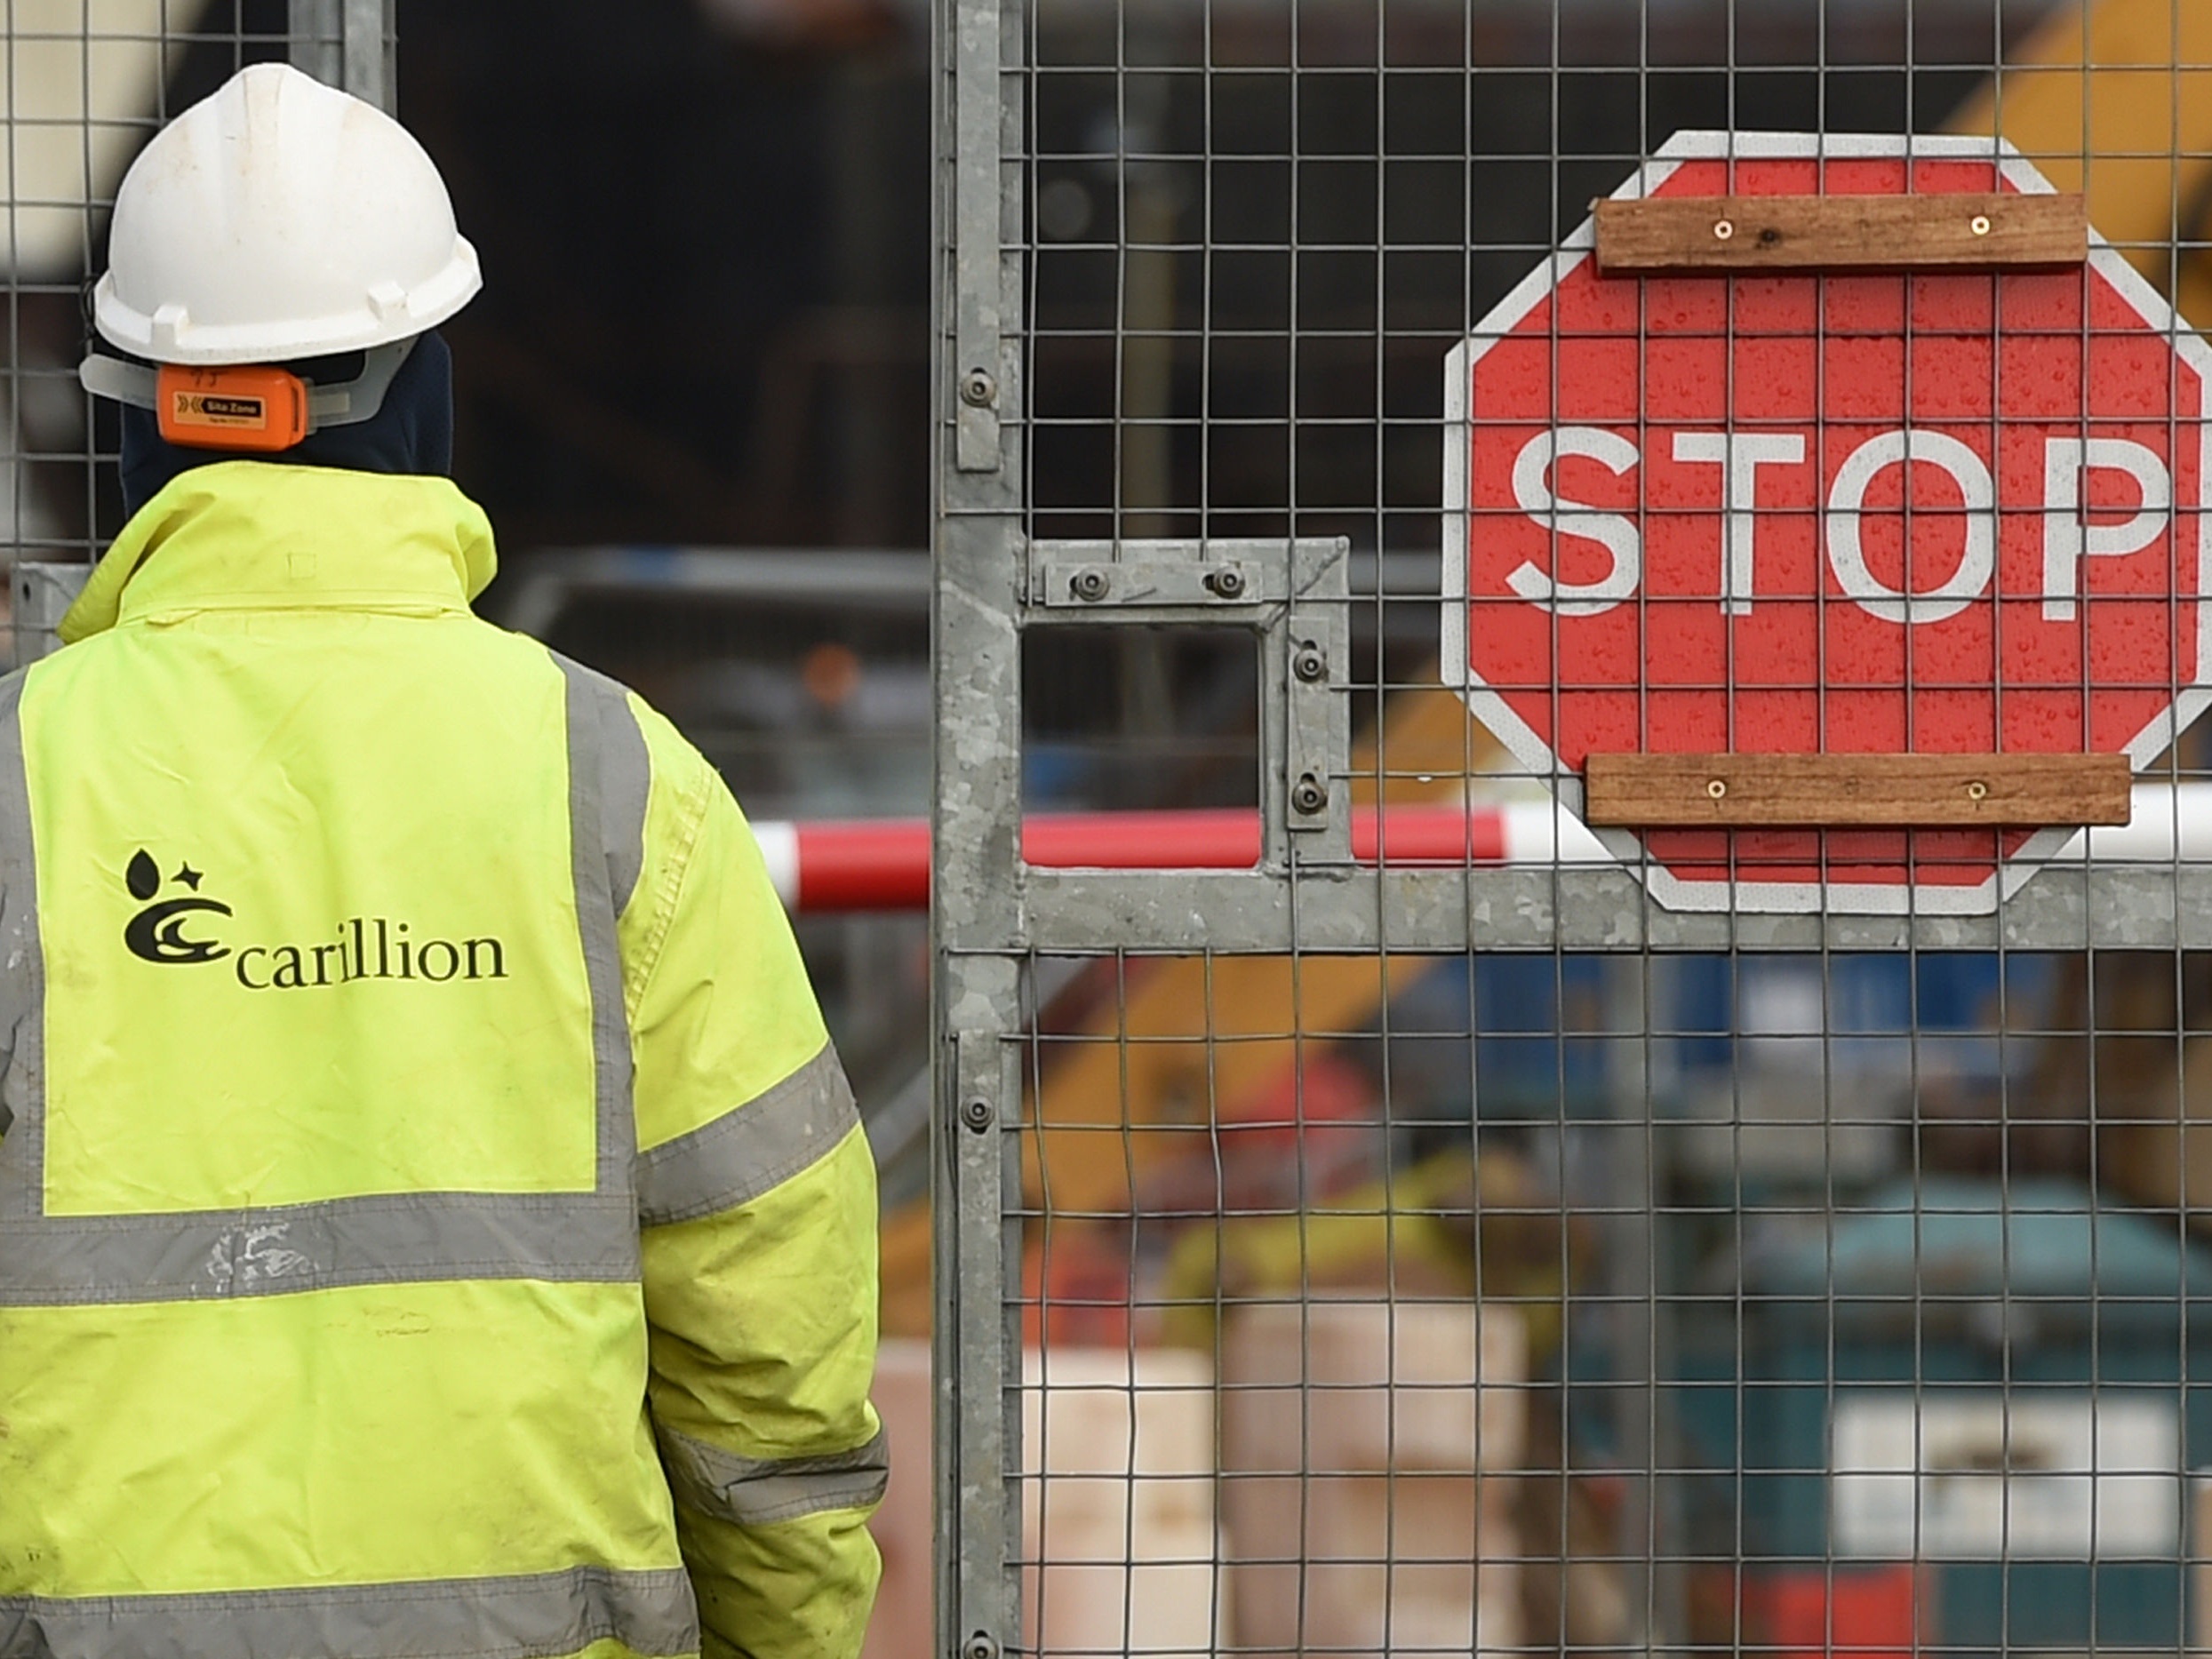 A Carillion worker at a construction site (Joe Giddens/PA)